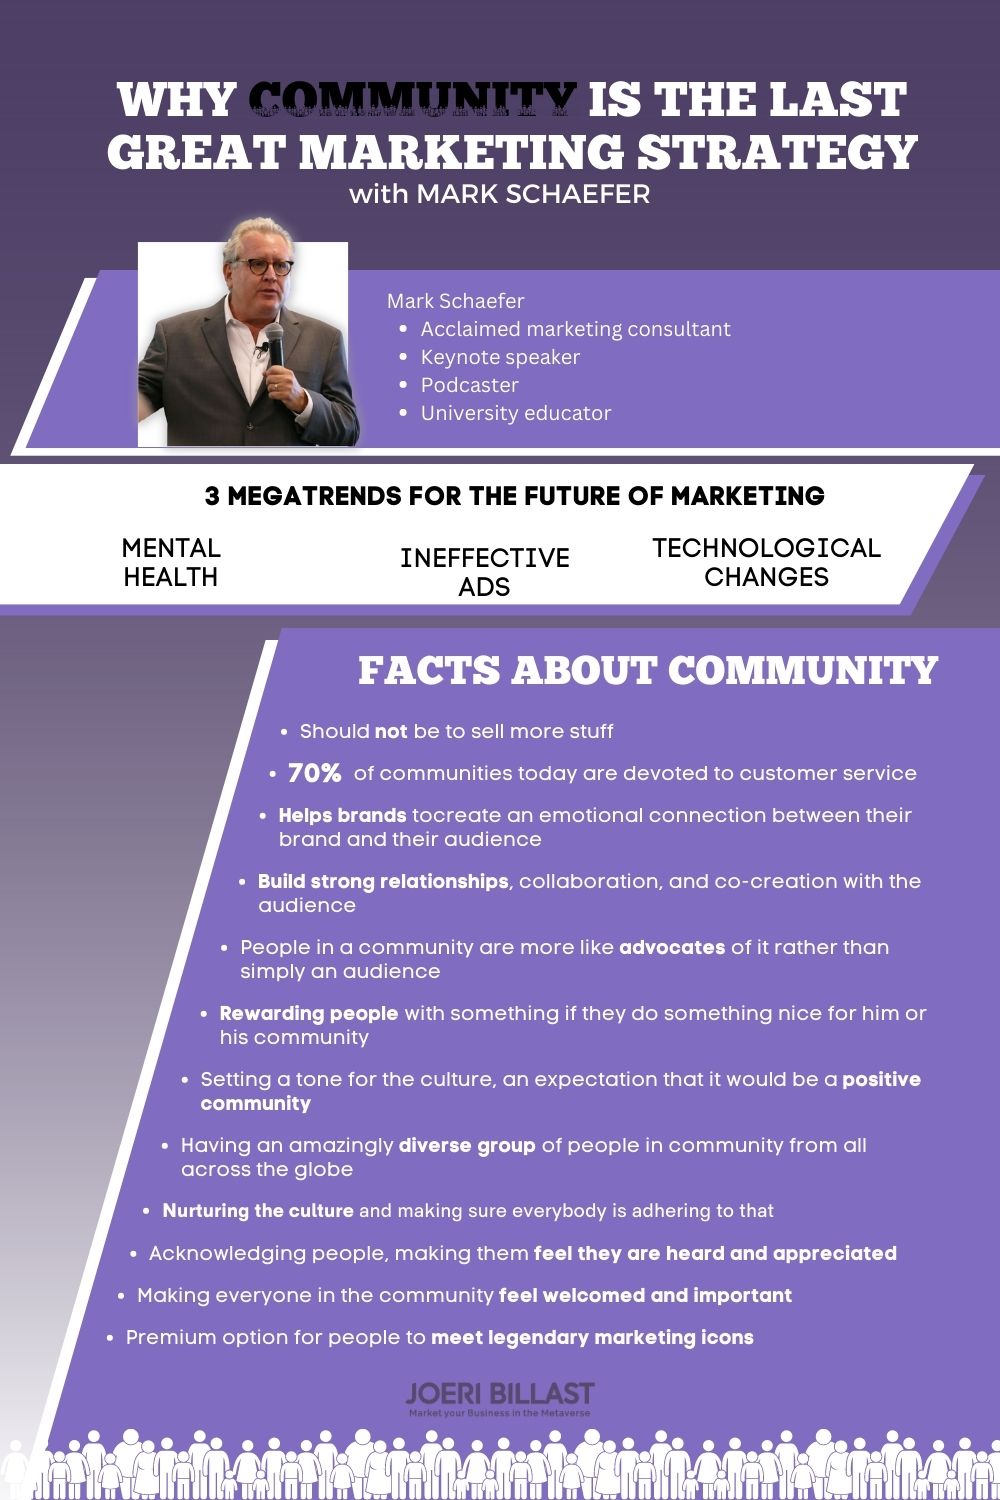 Why Community is the Last Great Marketing Strategy – with Mark Schaefer